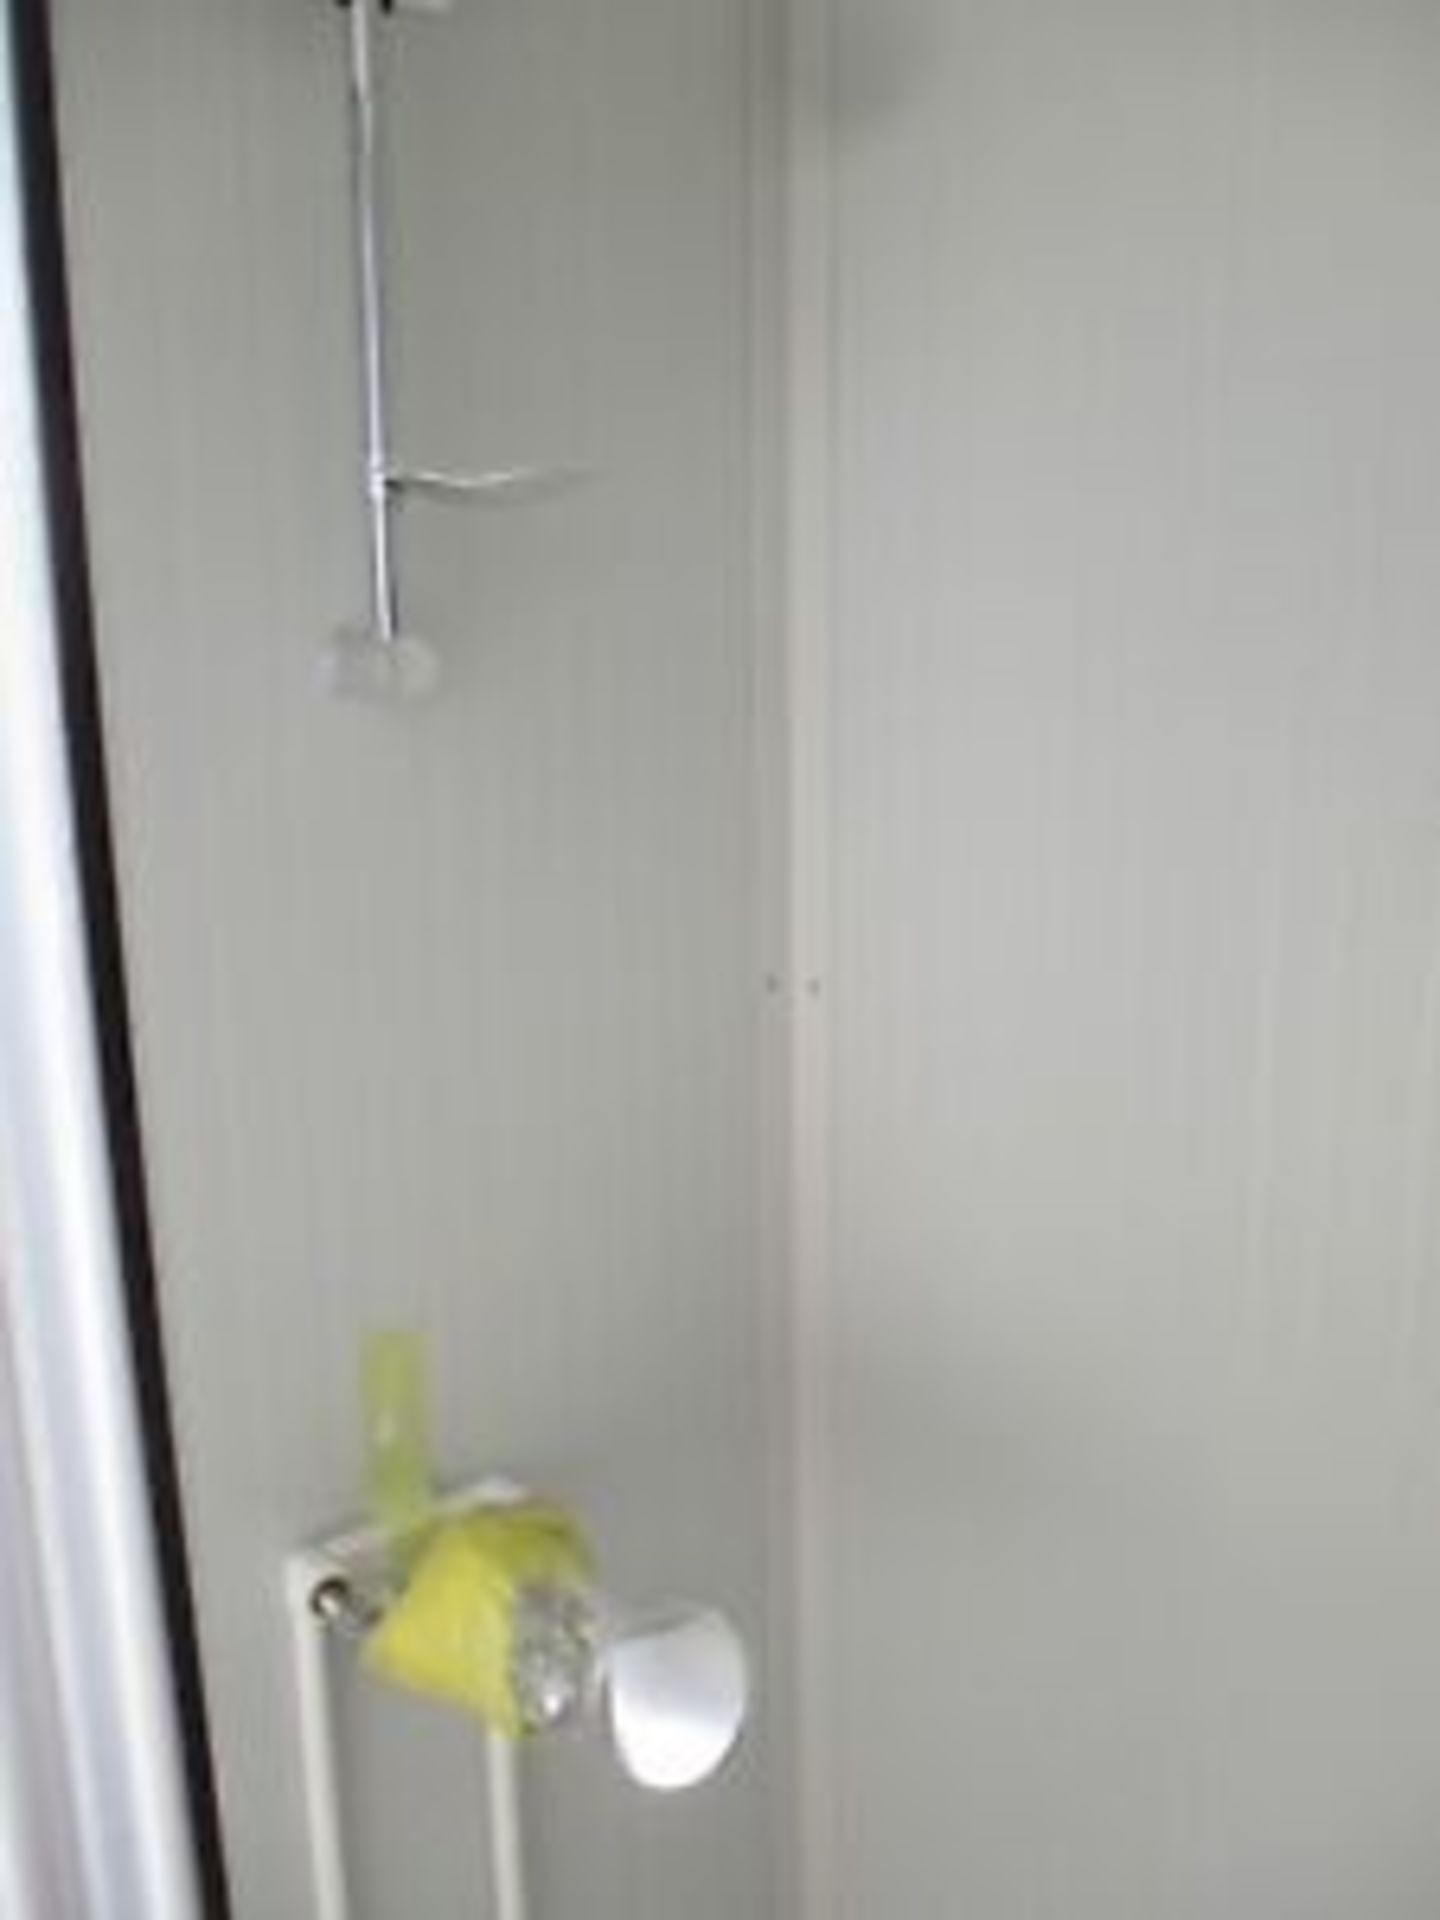 UNUSED ADACON 2.1M X 1.35M SHOWER TOILET BLOCK SHIPPING CONTAINER - Image 9 of 12